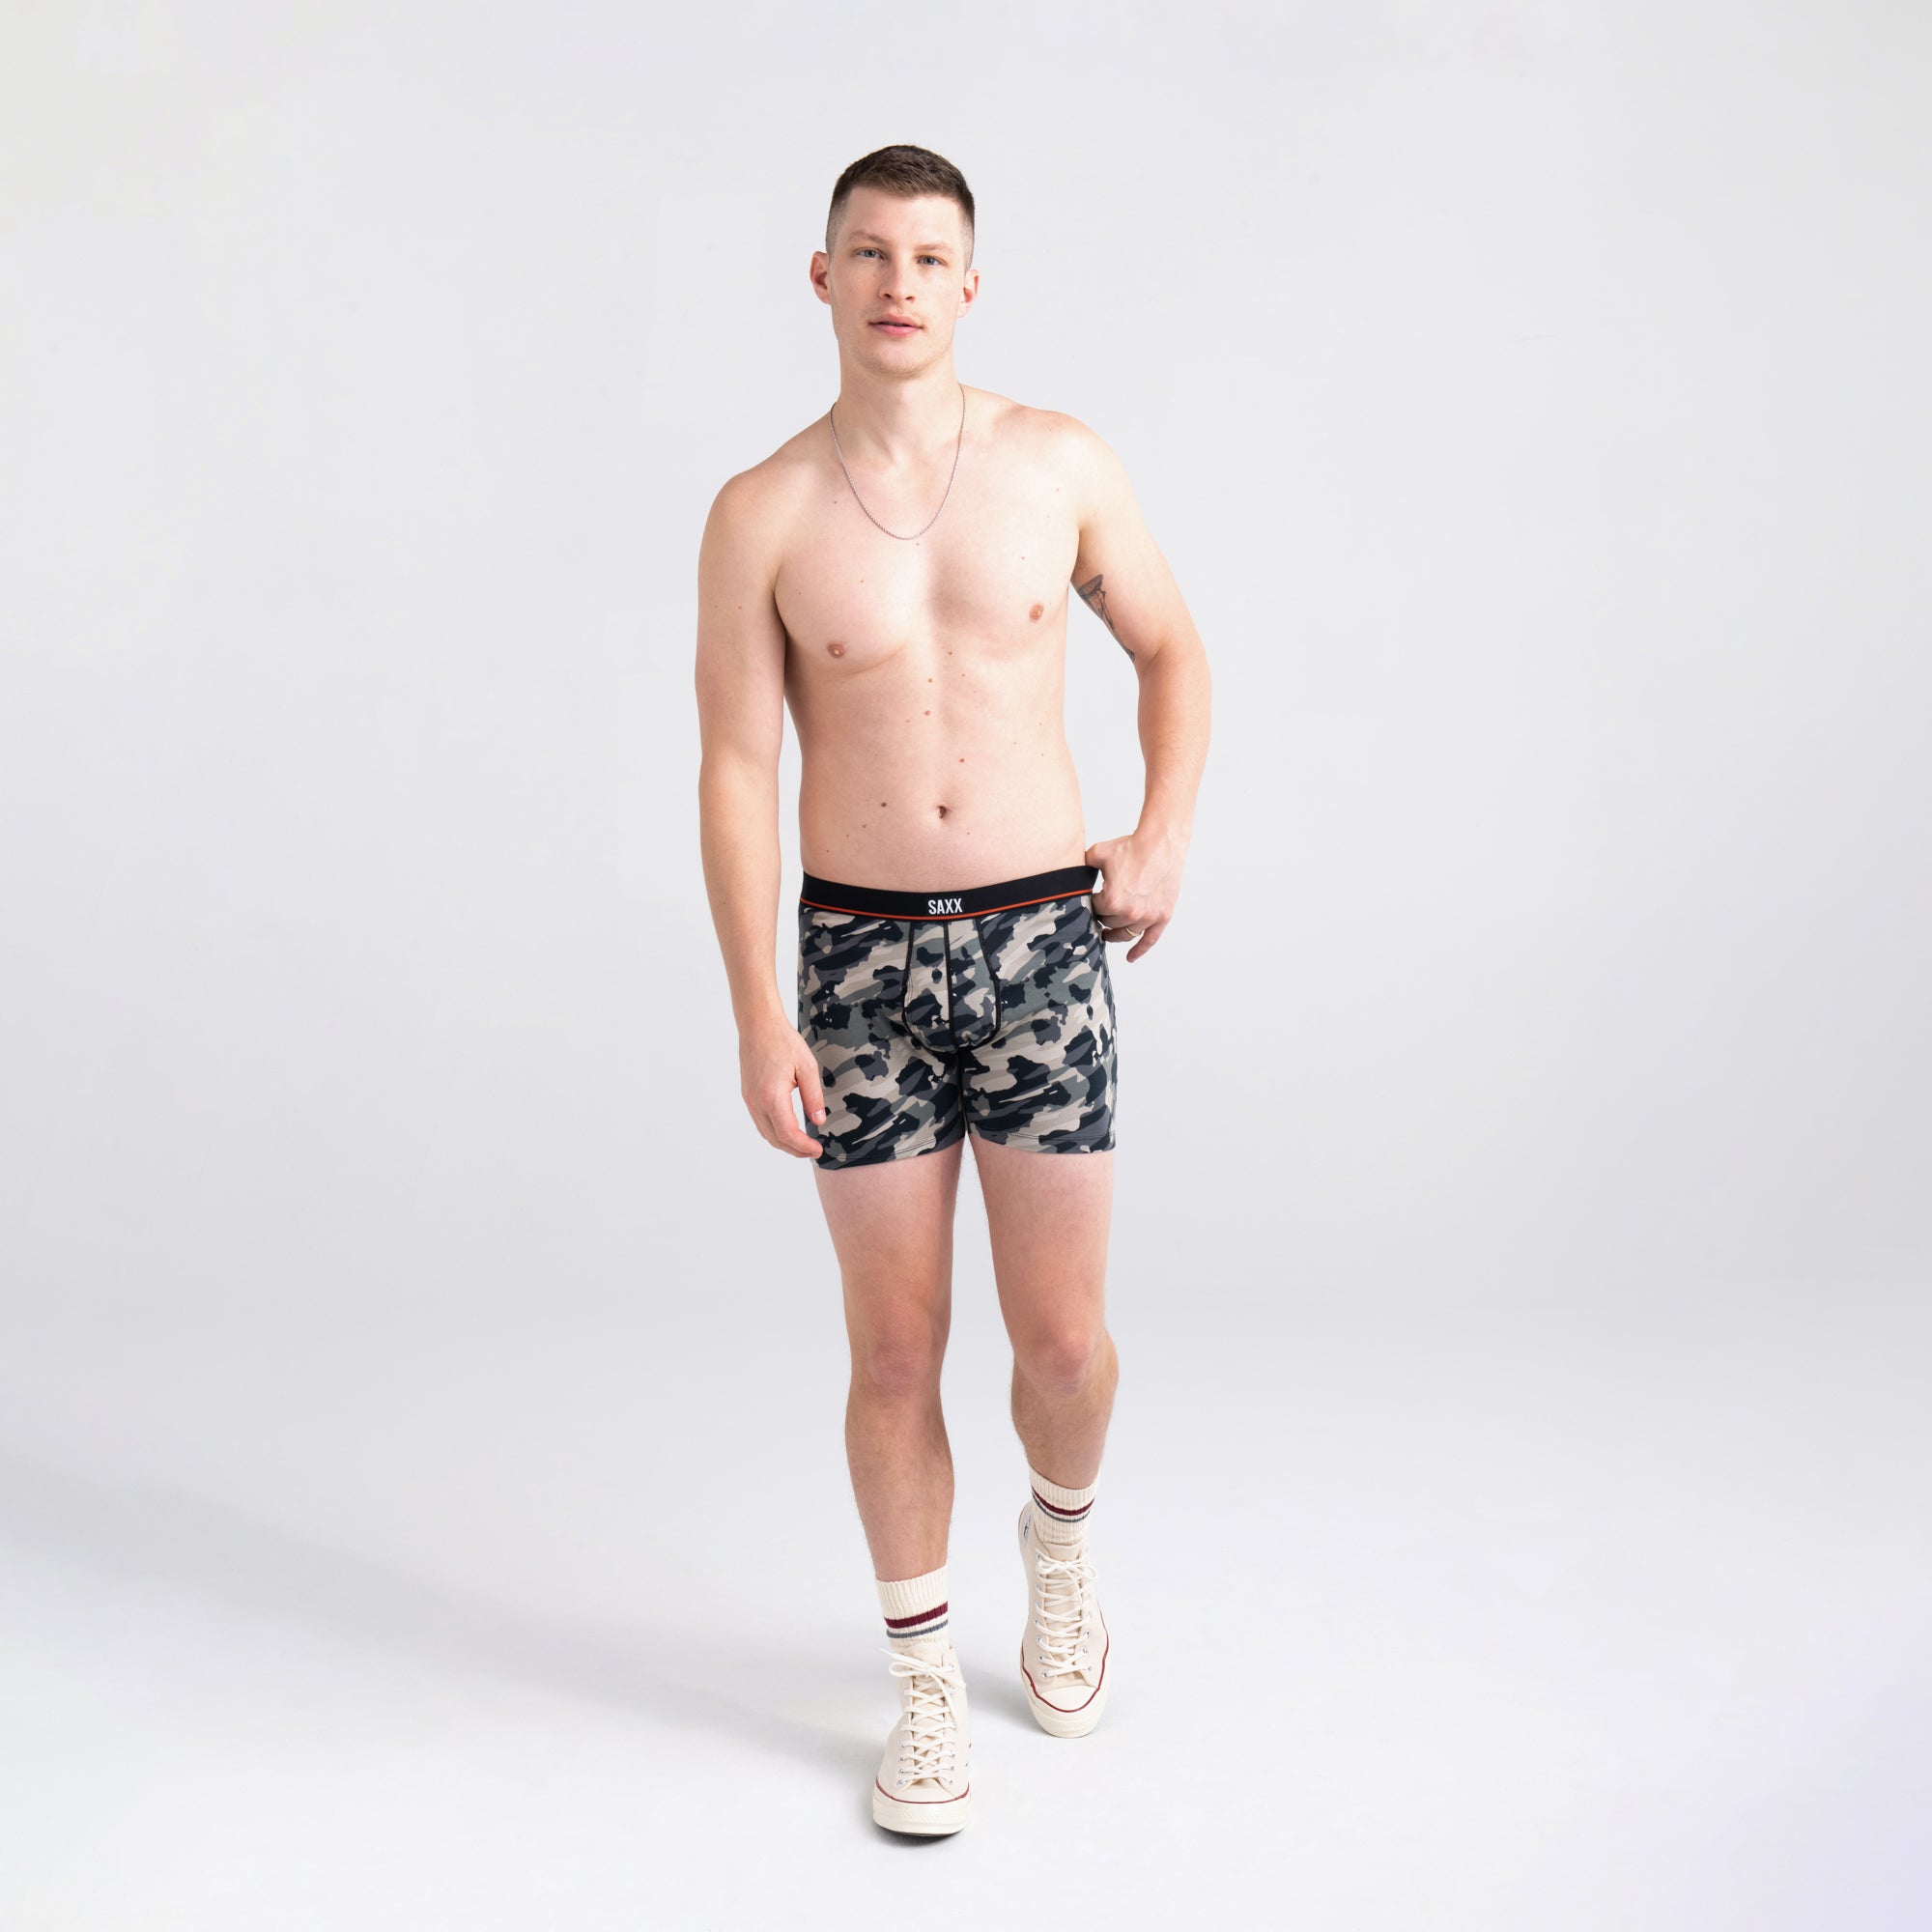 Non-Stop Stretch Cotton Boxer Brief 10-Pack in Assorted Prints